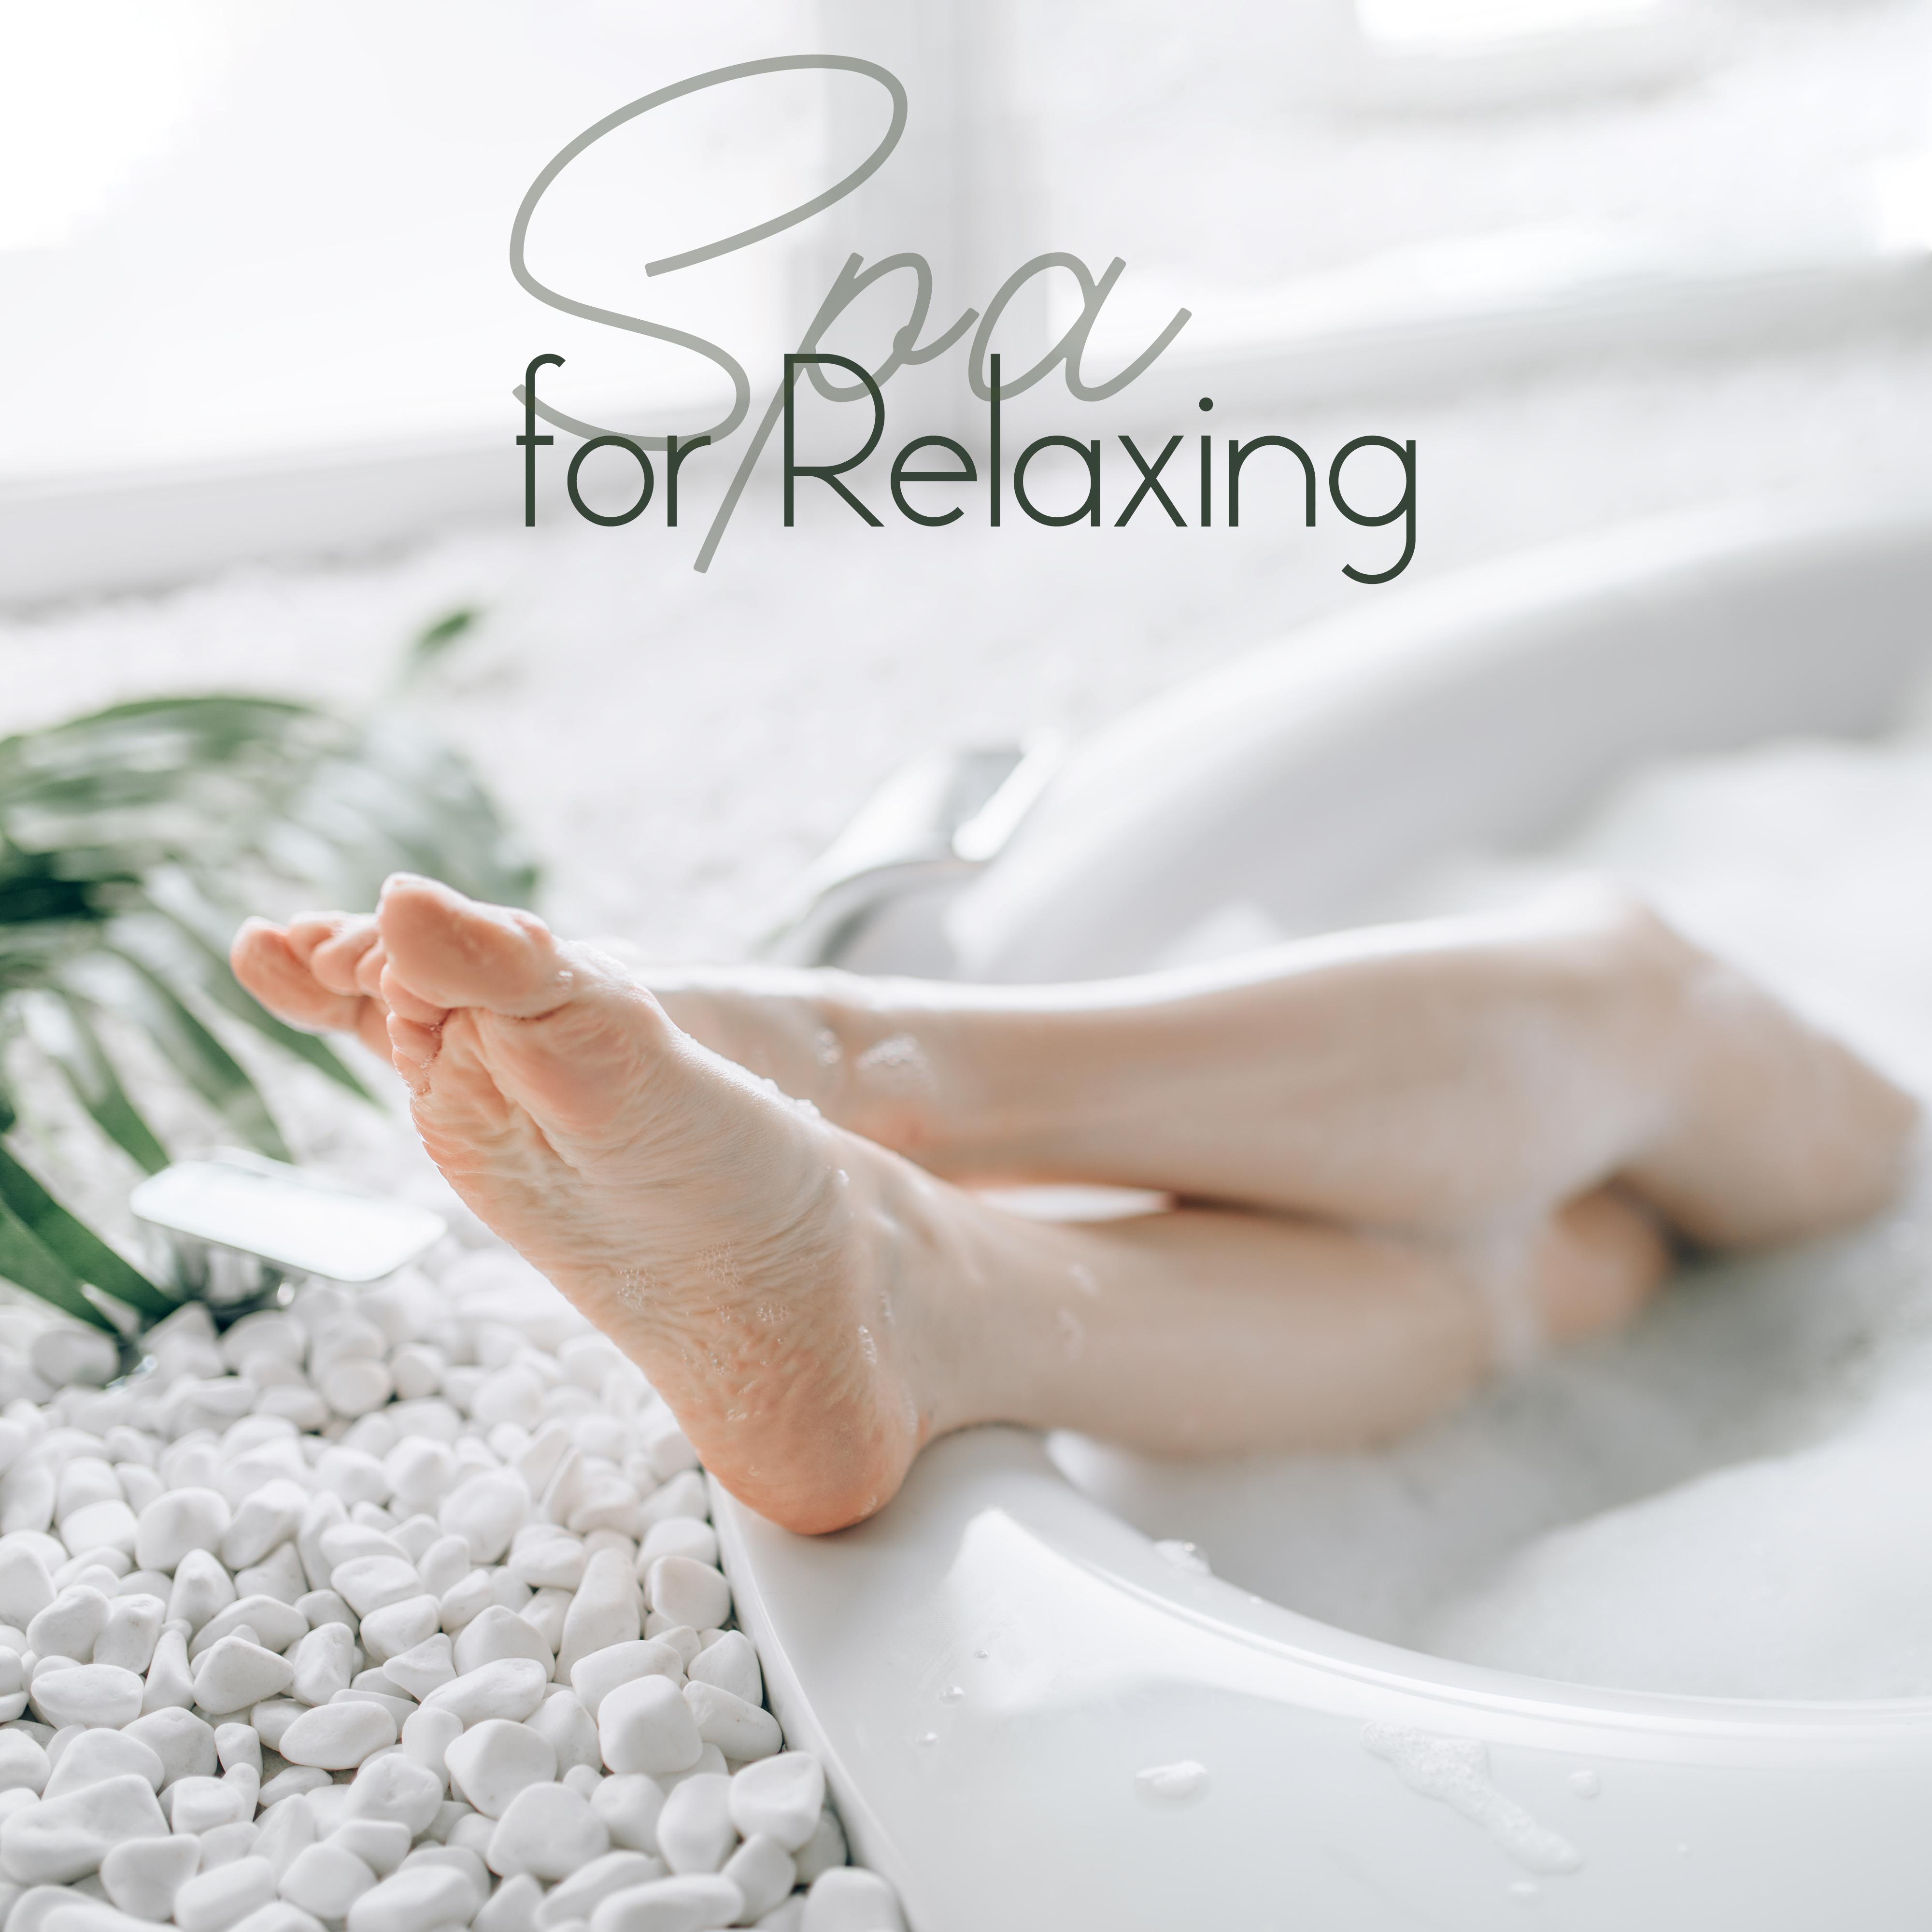 Spa for Relaxing  Deep Therapy Music, Calm Down, Massage Music for Relaxation, Sleep, Spa, Wellness, Zen Lounge, Music Zone, Stress Relief